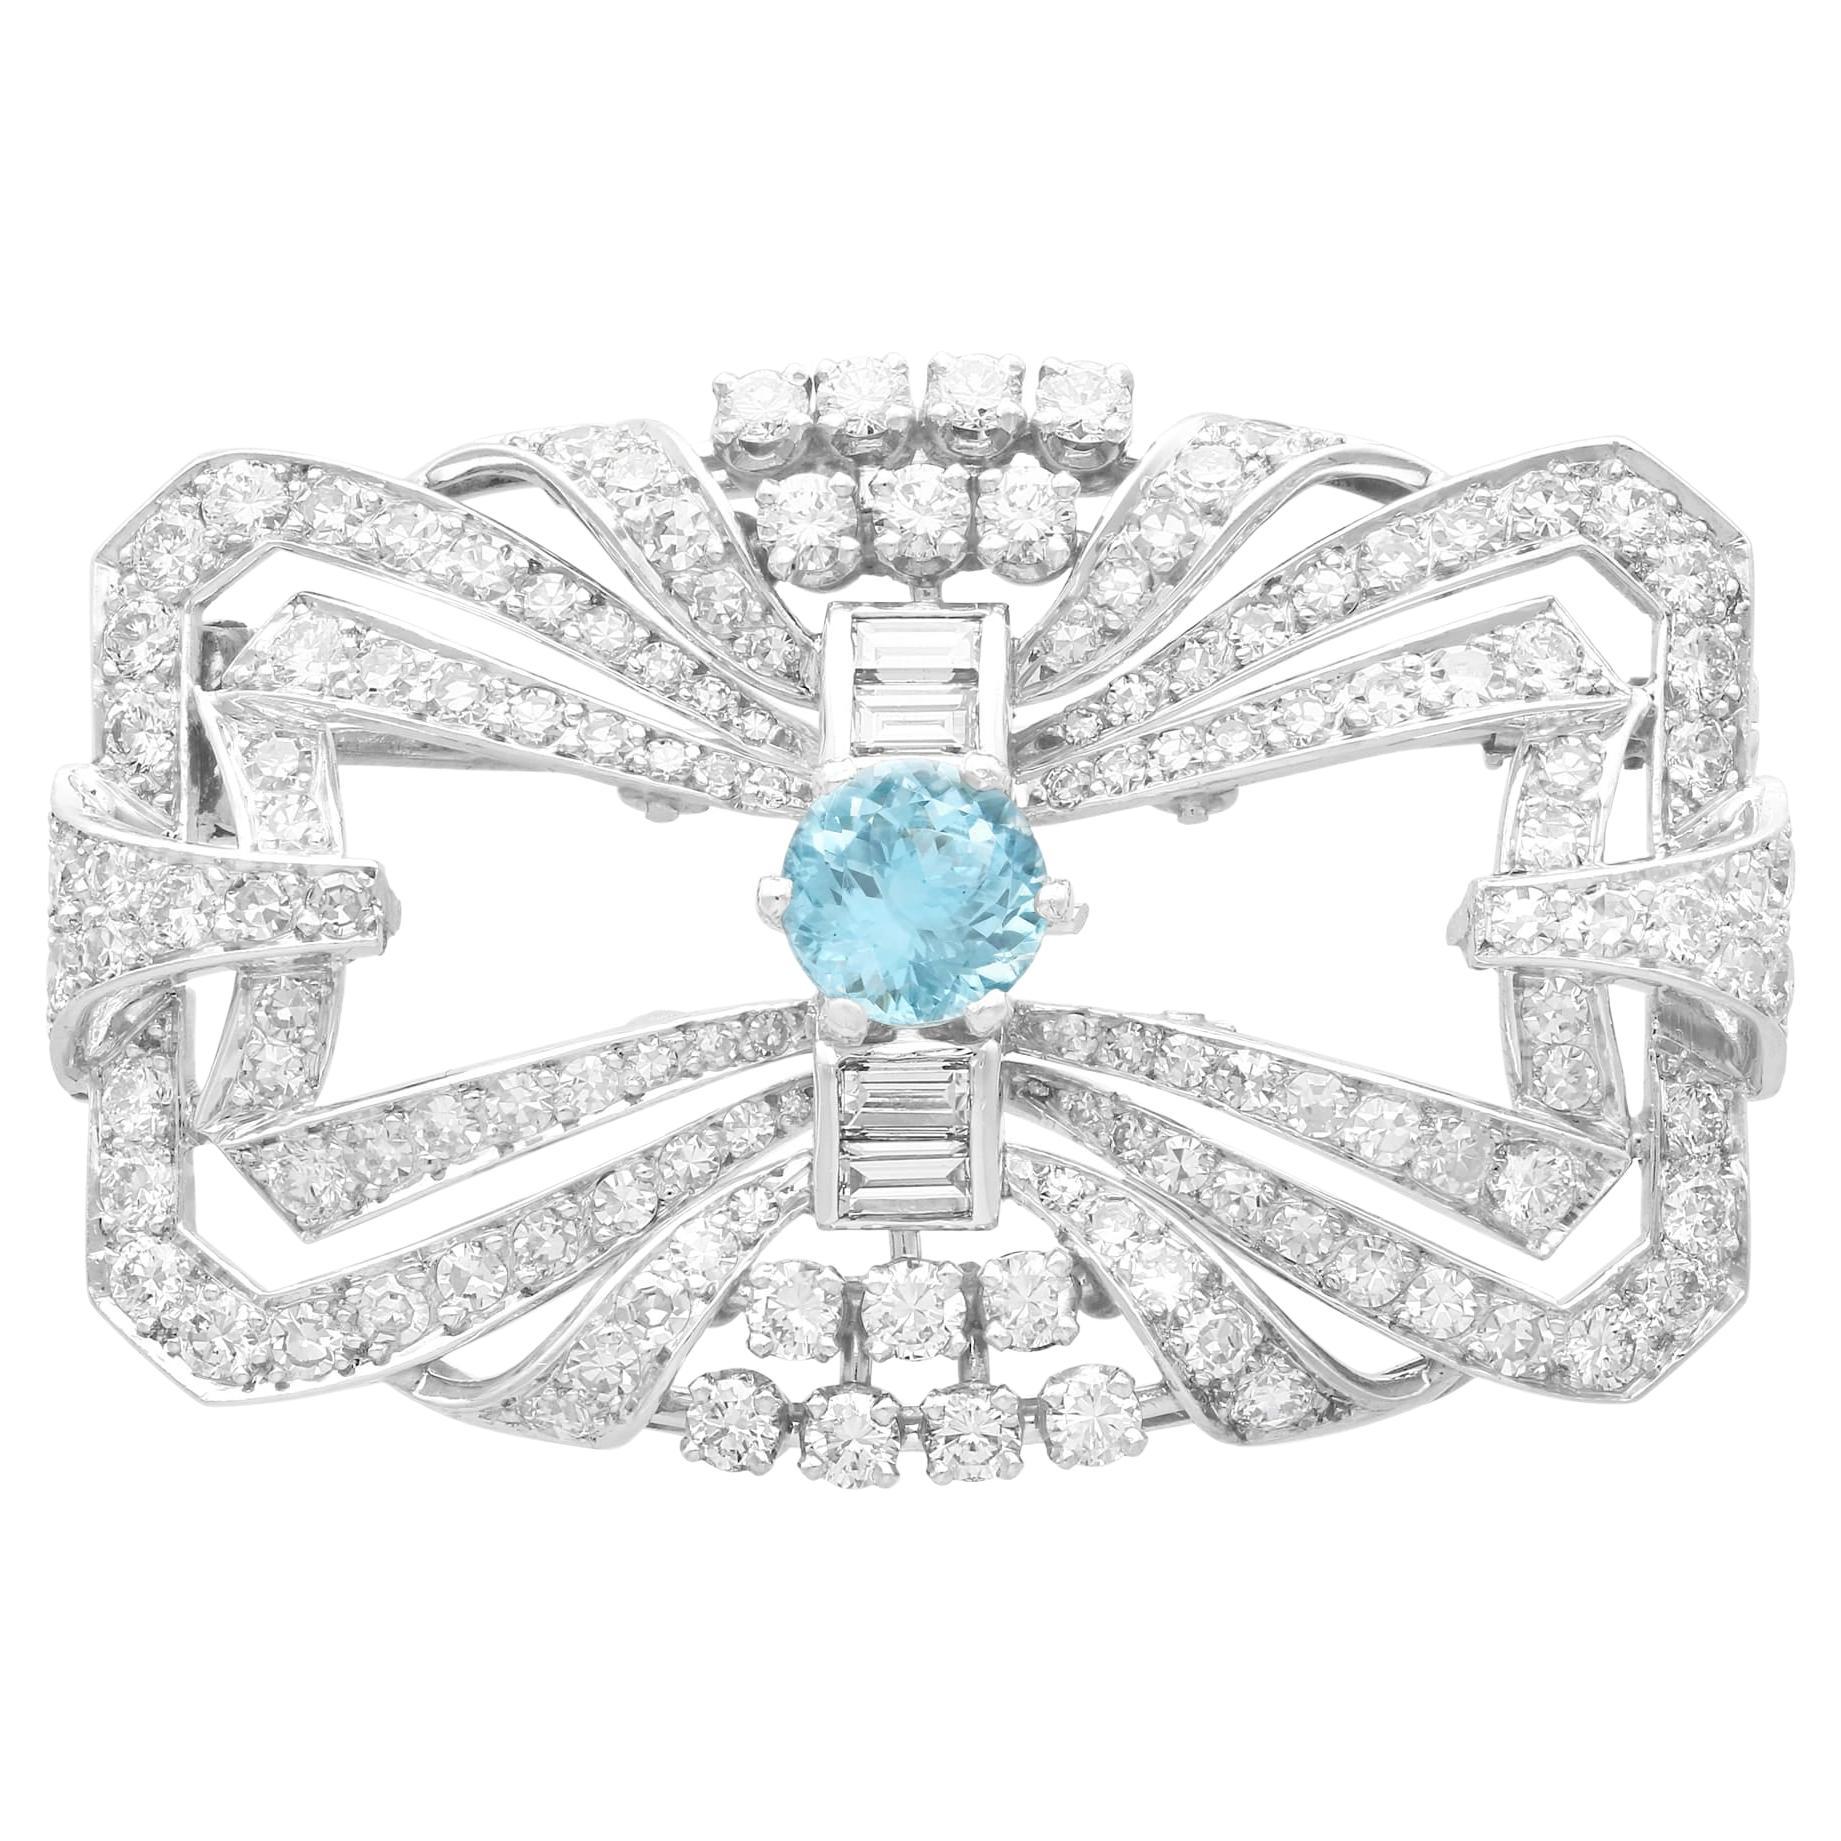 Vintage French 1.05 Carat Aquamarine and 4.38 Carat Diamond and Platinum Brooch For Sale